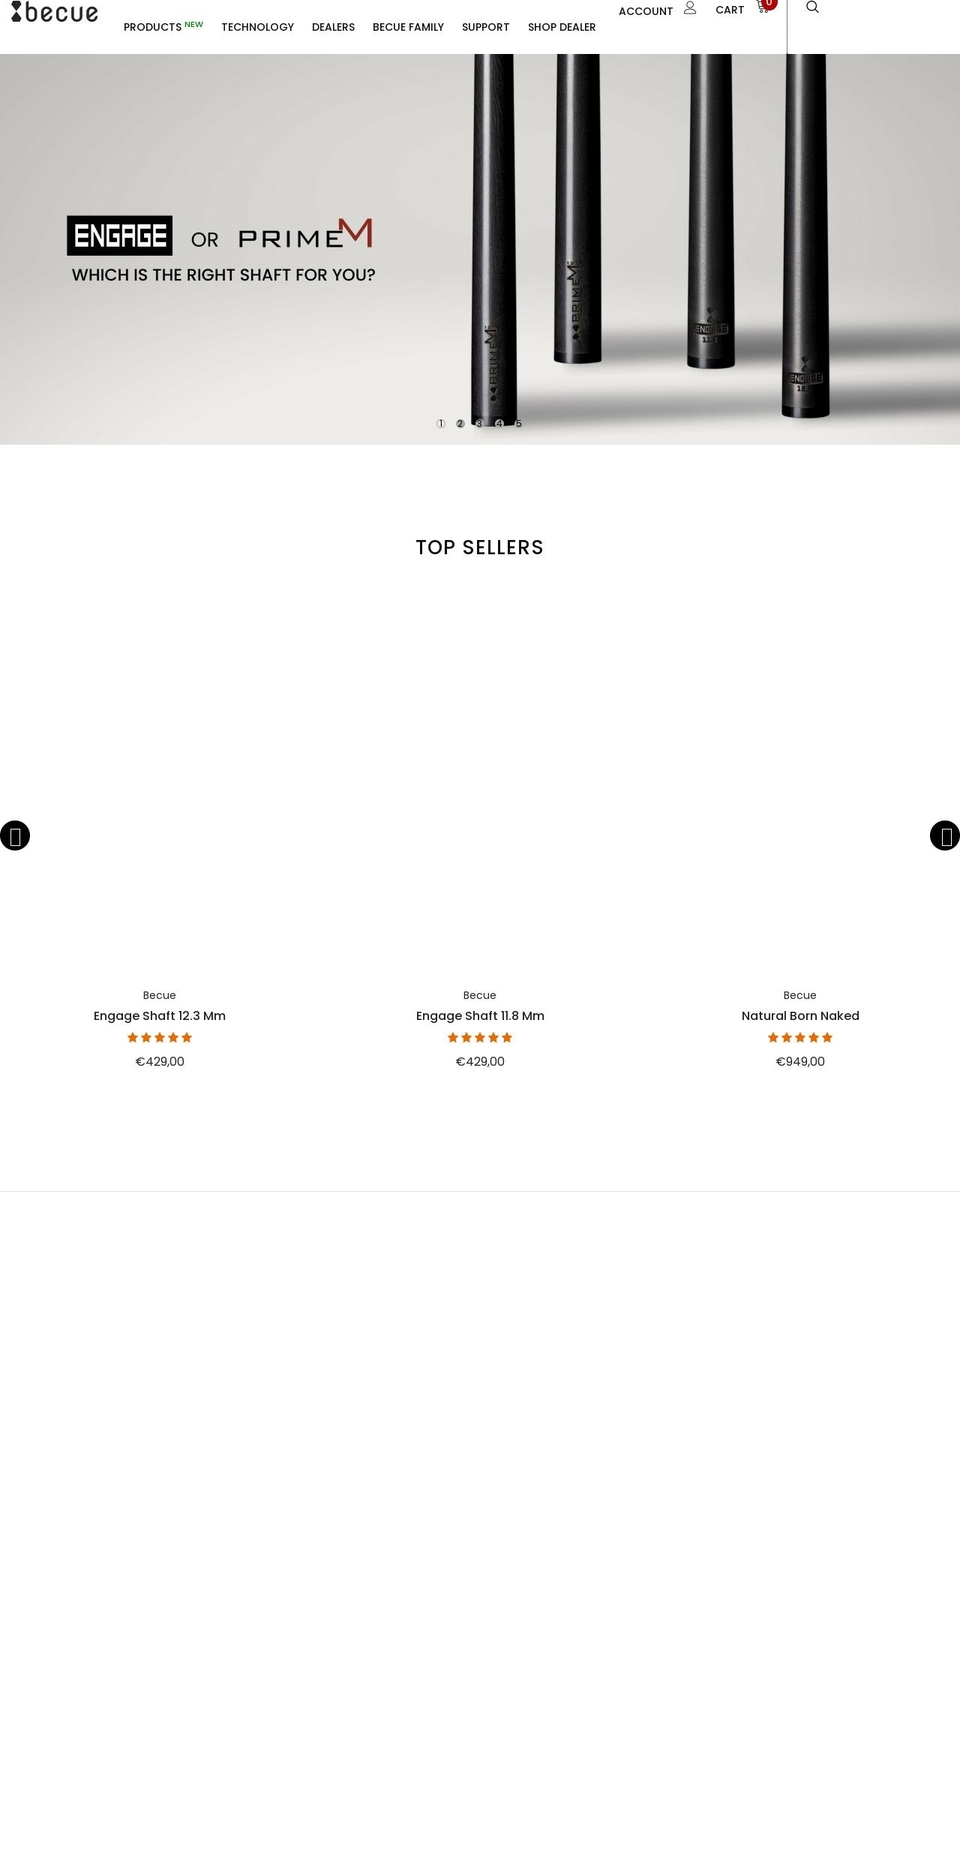 WATCHES Shopify theme site example becueofficial.com